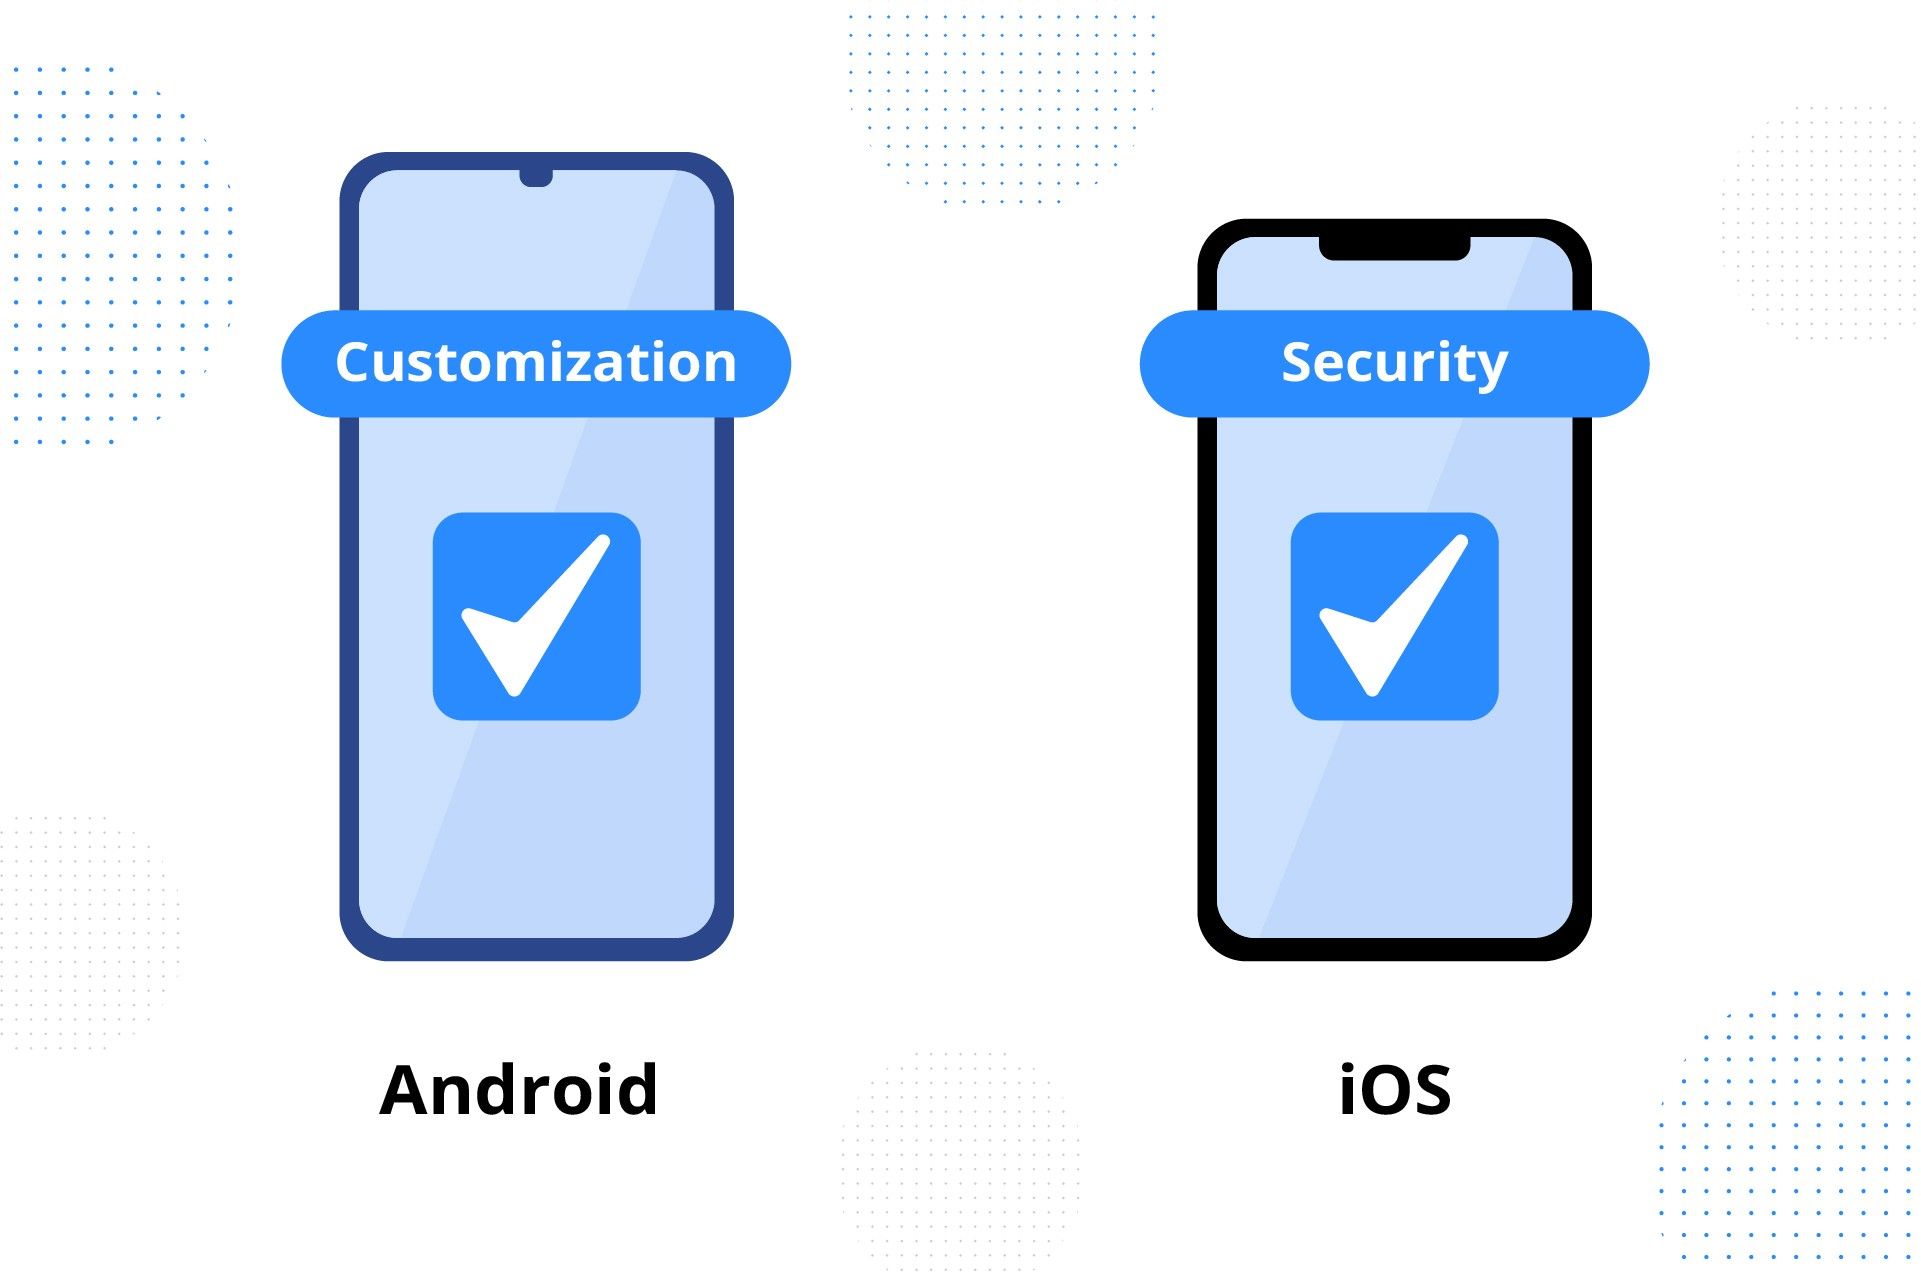 iOS vs Android customization and security